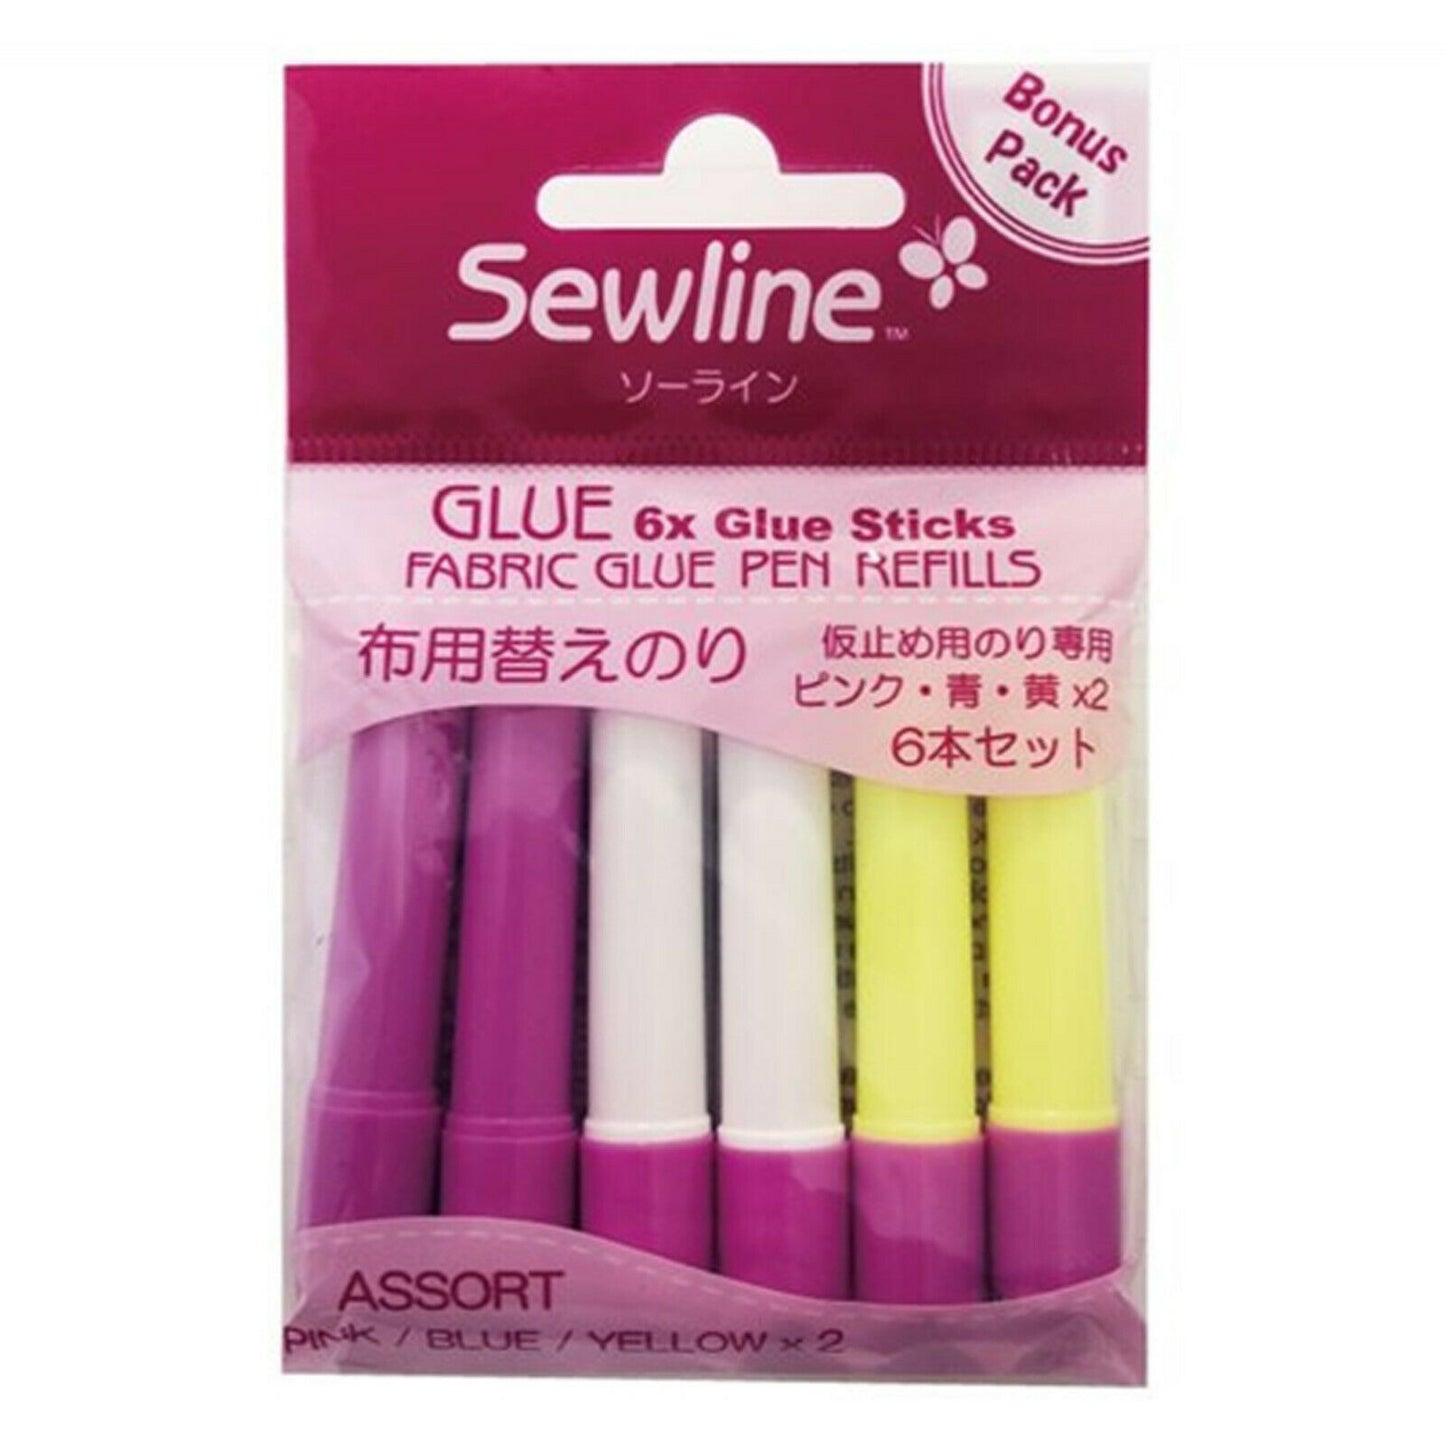 Sewline Fabric Glue Pen Refills - Pack of 6 (2 each of Pink/Blue/Yellow)